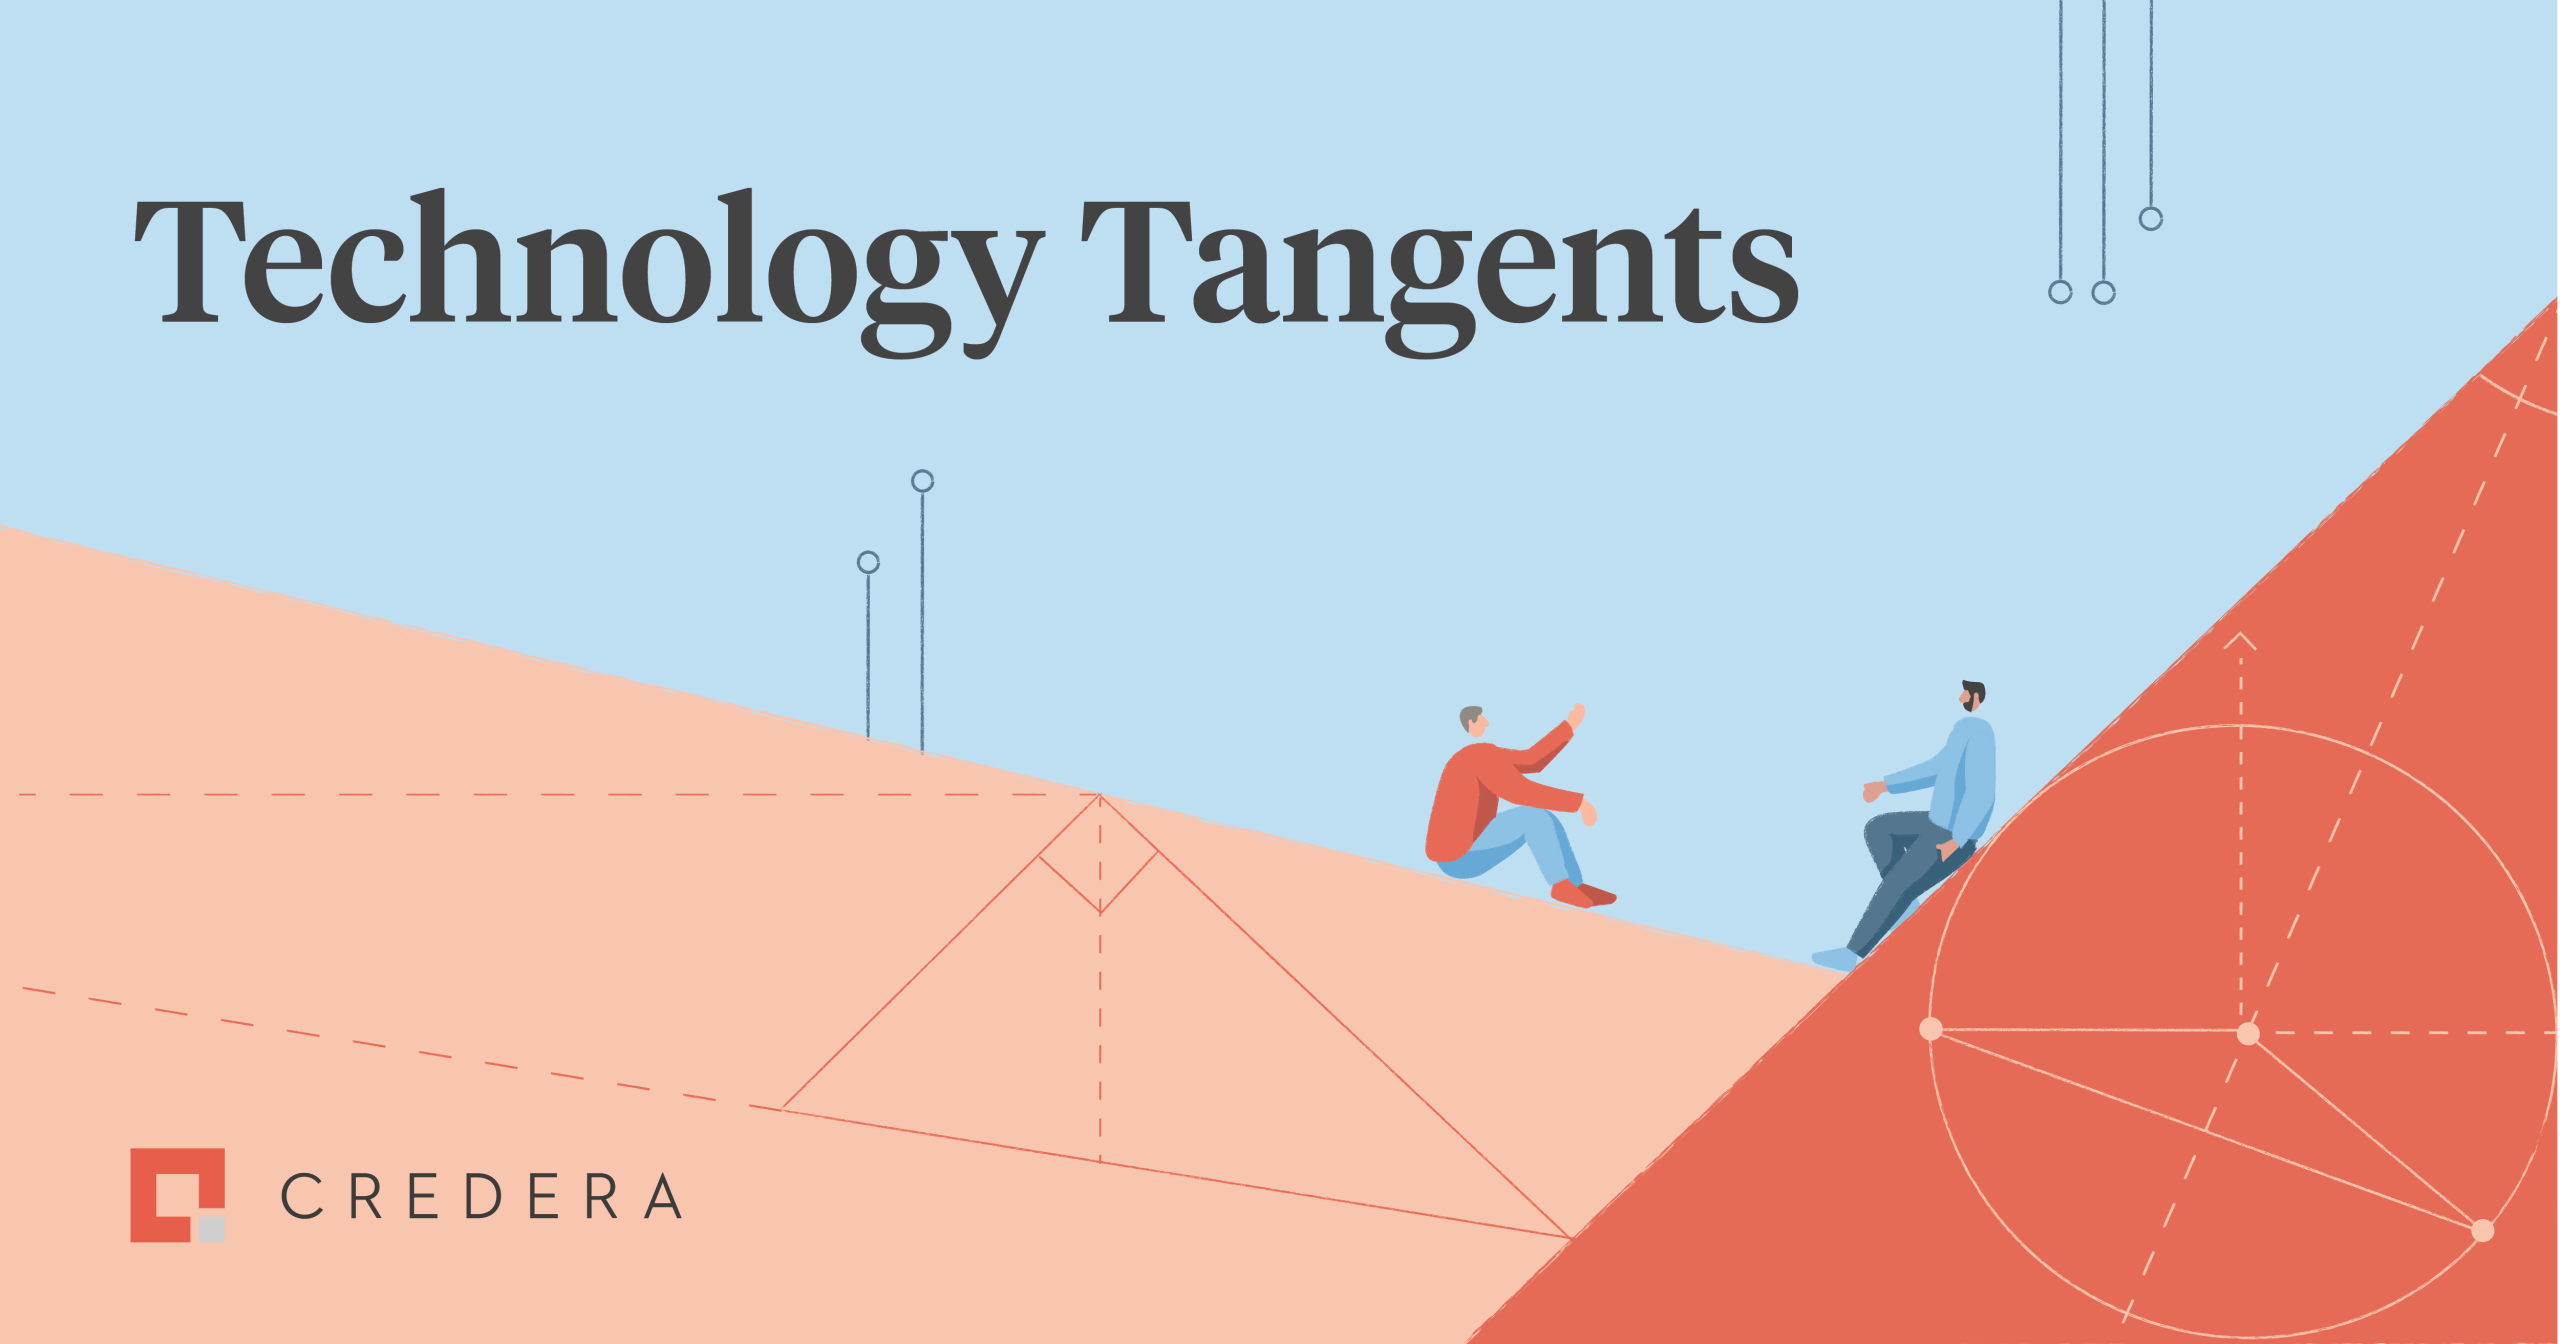 Technology Tangents | What's Going on at Meta?